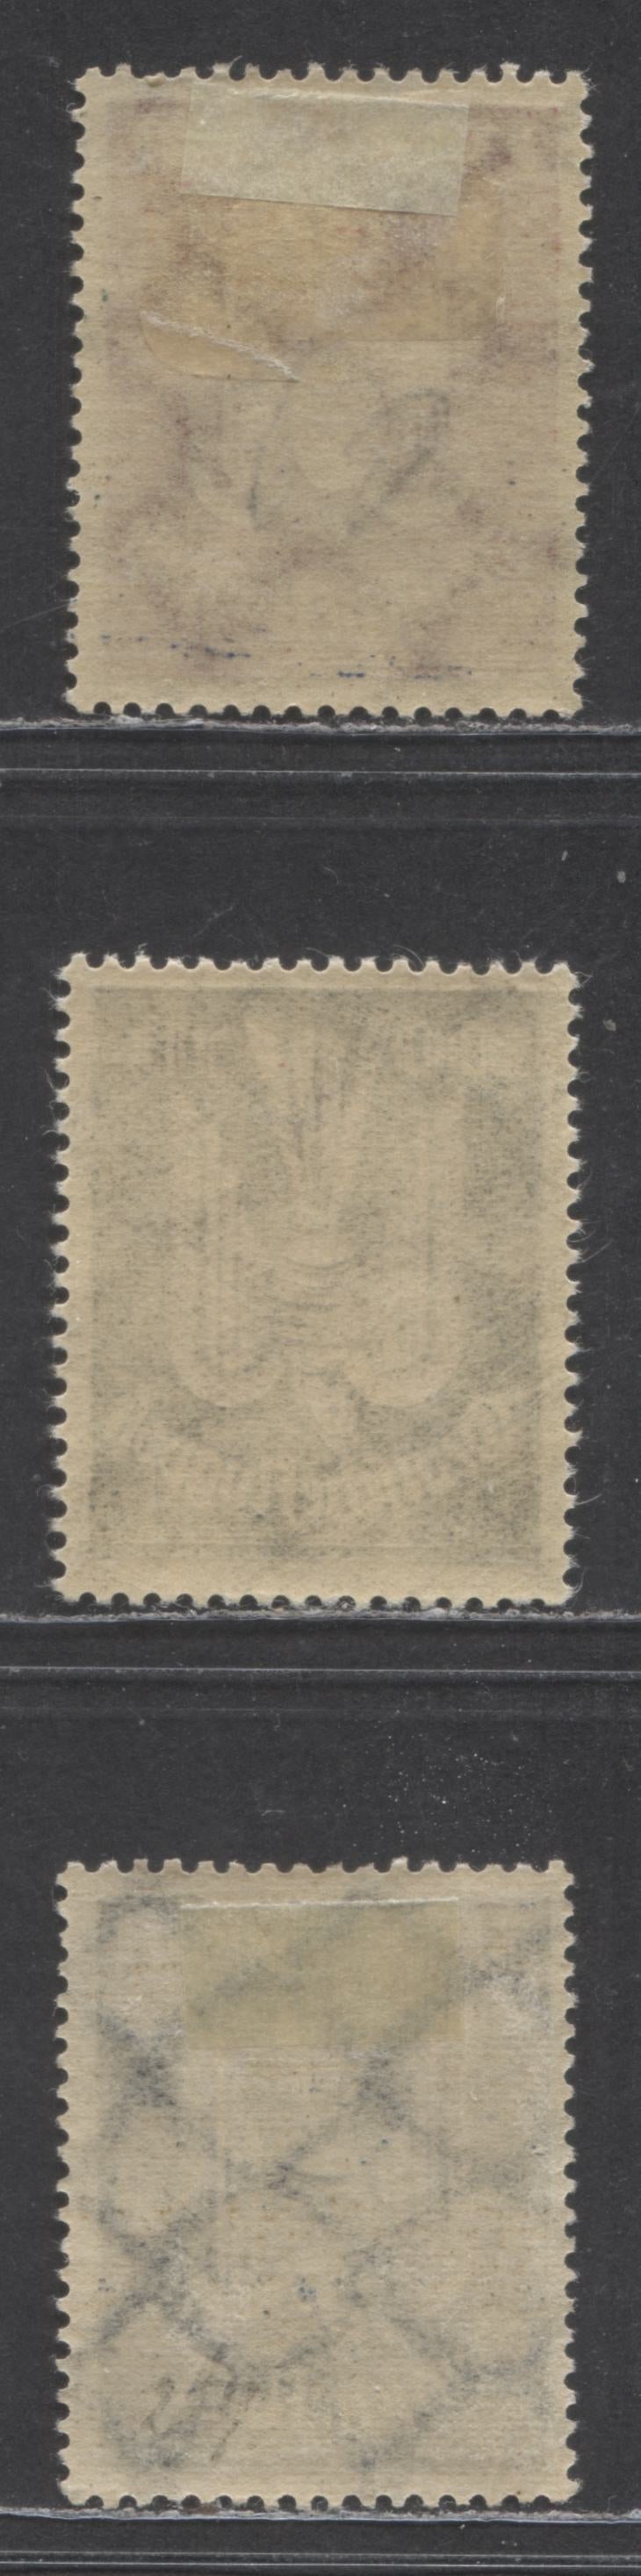 Lot 99 Germany SC#C9-C10,C14var(MI#216a-217a,237) 1922-1923 Airmail Issue, Showing Burelage Shifted To The Right, 3 VF NH&OG Singles, Estimated Value $6 USD